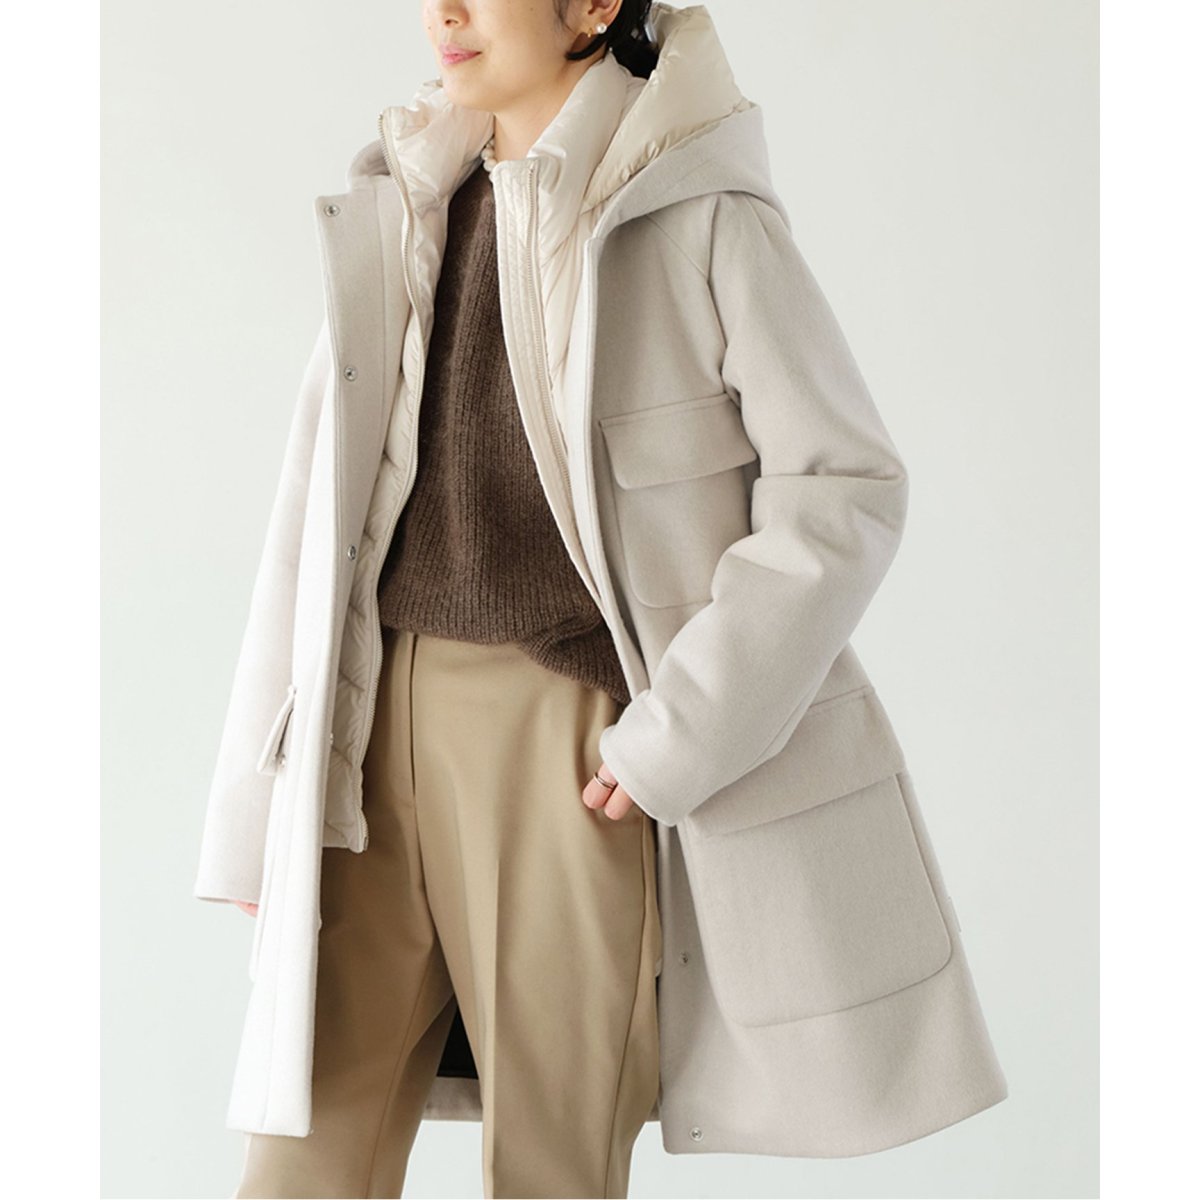 WOOLRICH/ウールリッチ】SIDELINE 2in1ダウン フードコート | イエナ 